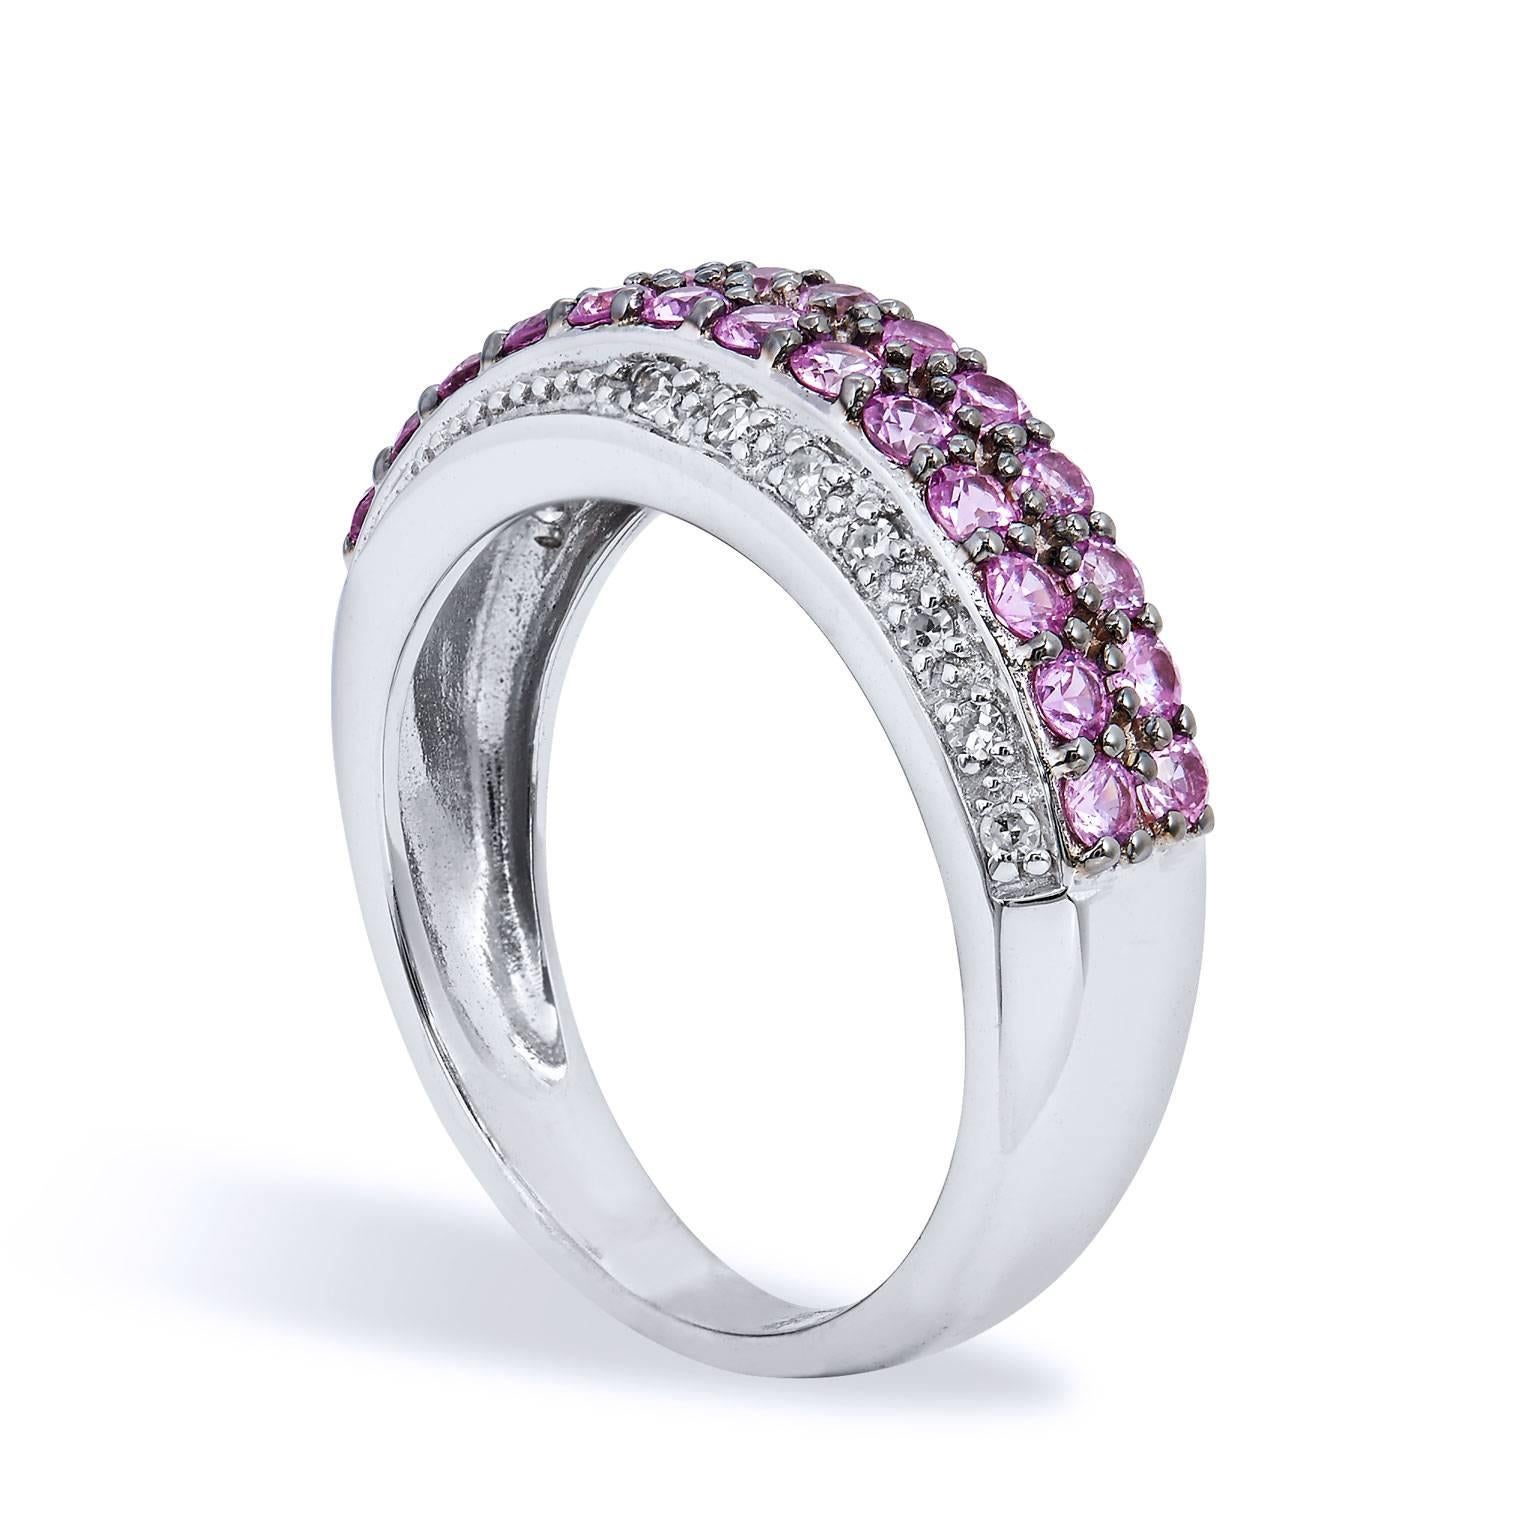 Enjoy this previously loved 14 karat white gold ring featuring fourteen single cut diamonds with a total weight of 0.10 carat and twenty-six pieces of pink sapphire pave set.